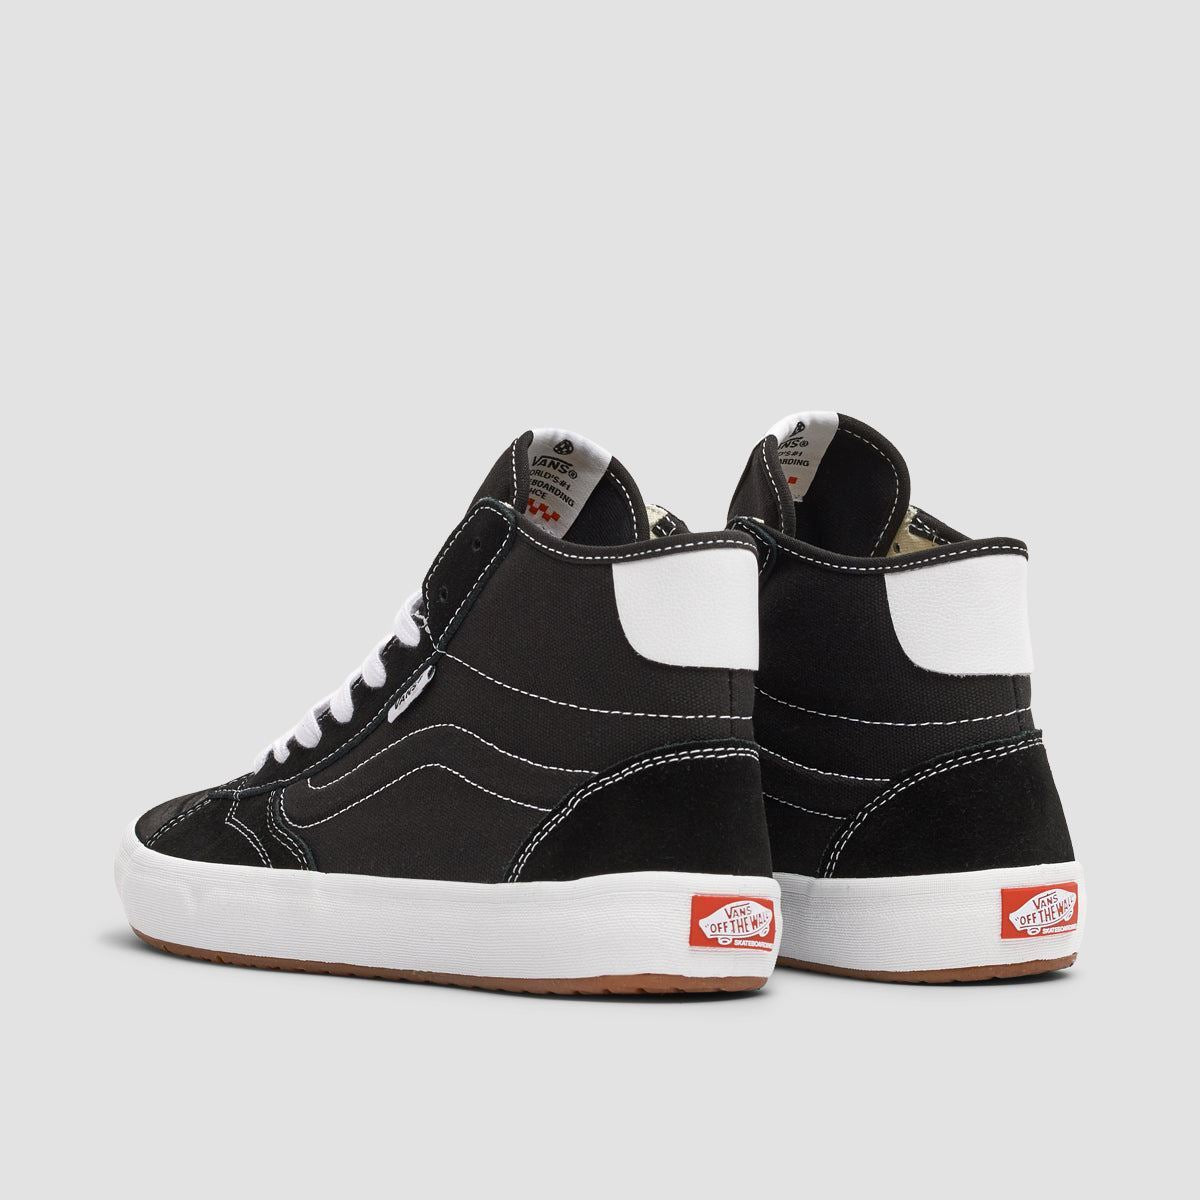 Vans The Lizzie High Top Shoes - Black/White